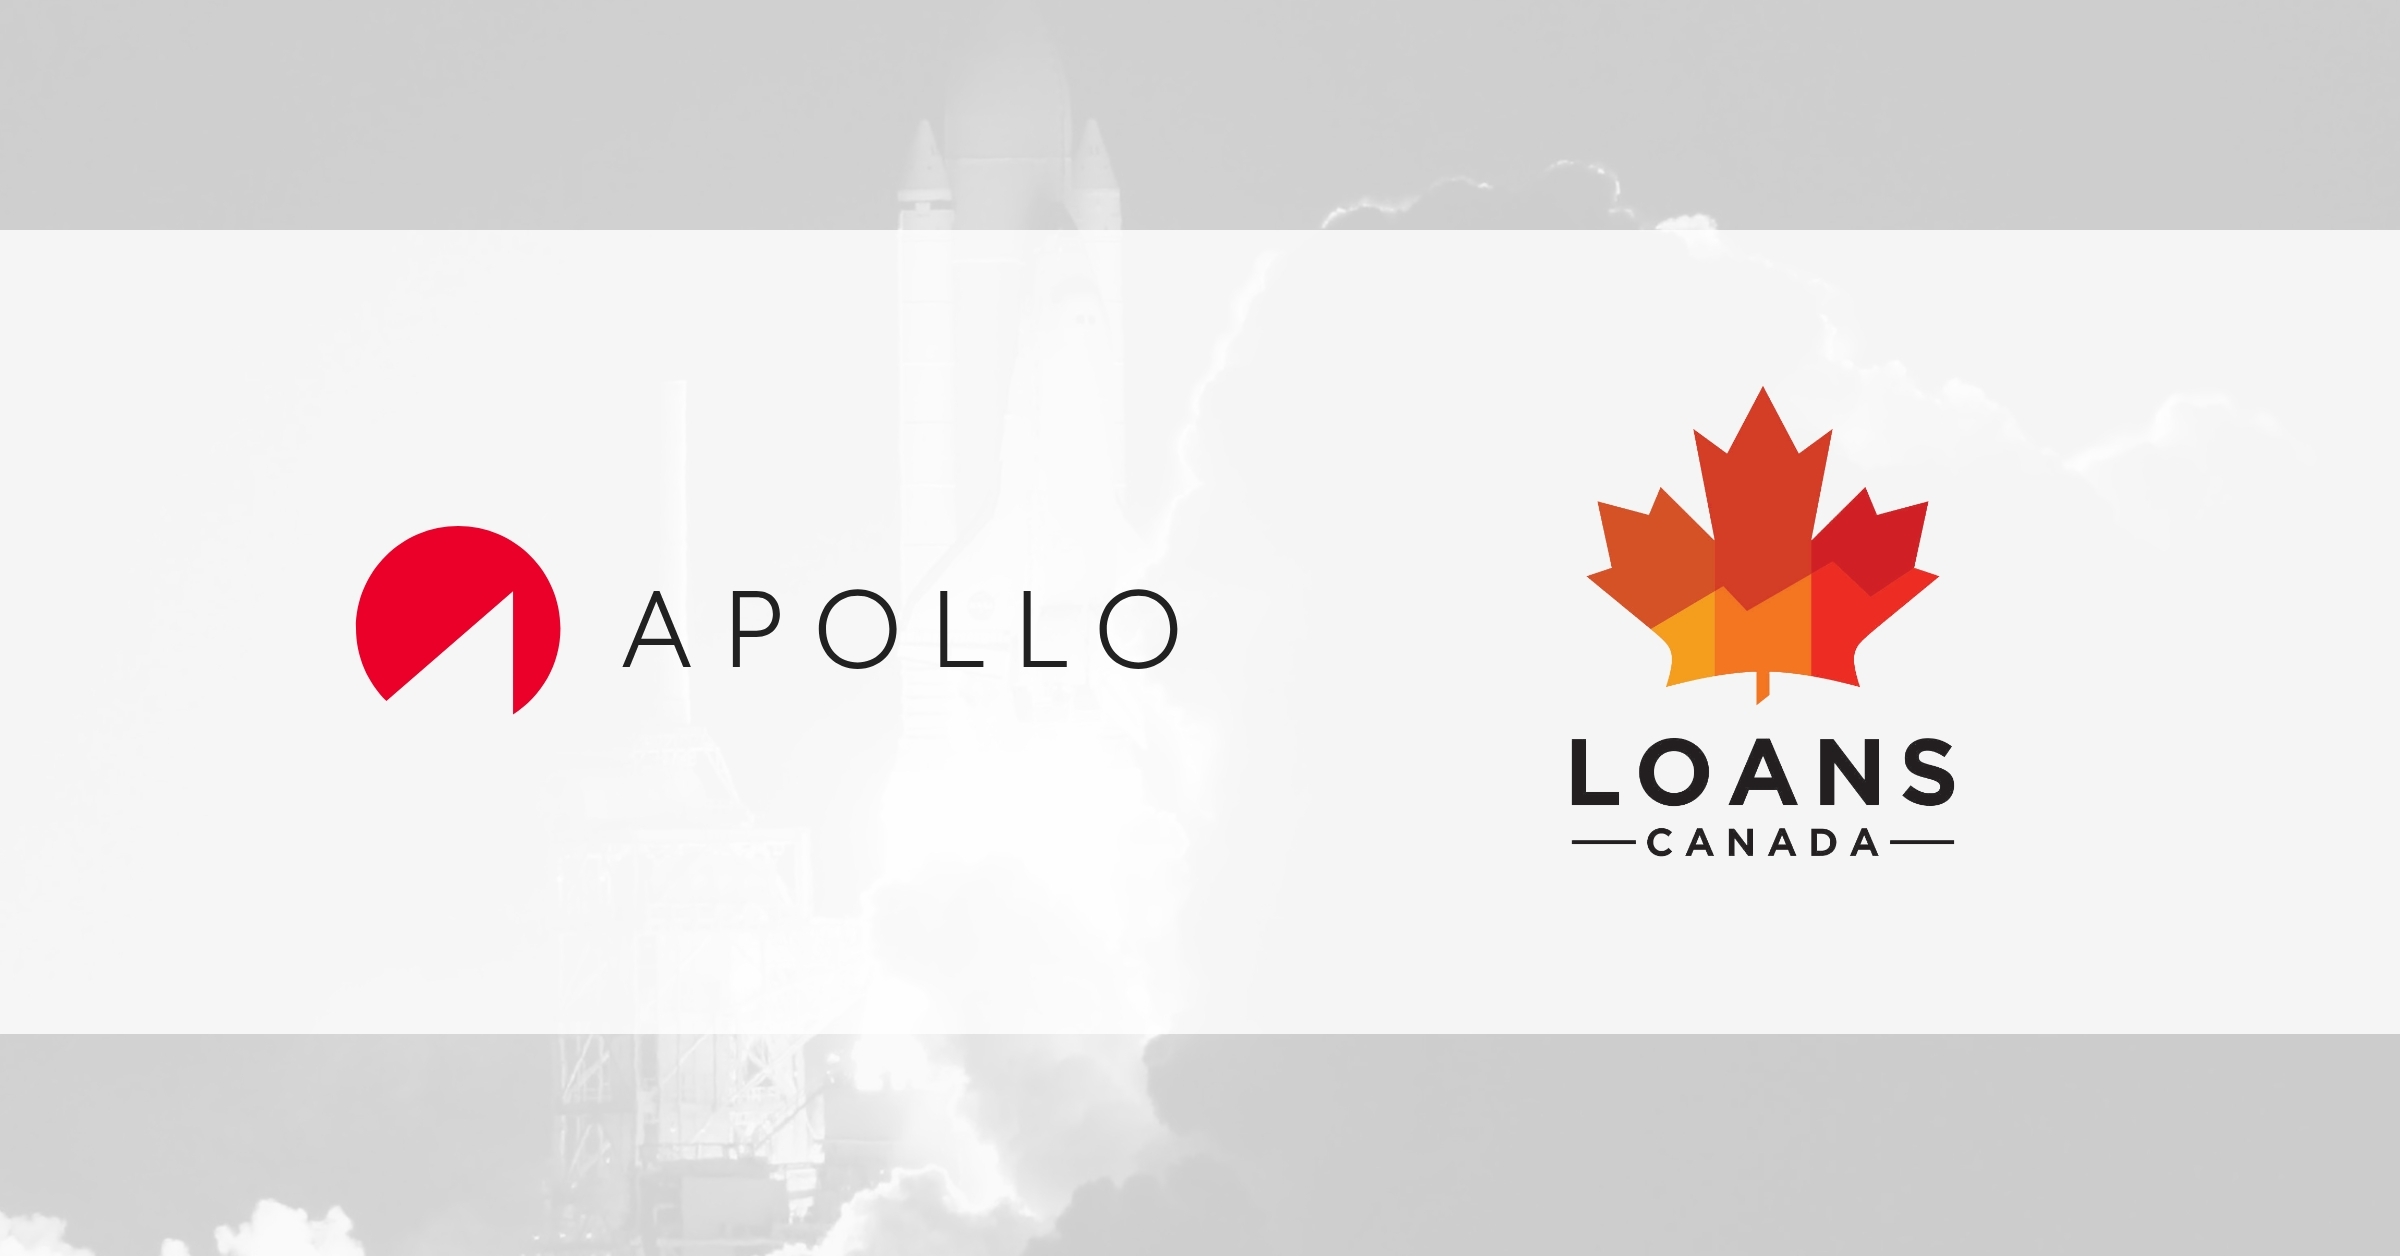 Apollo Insurance Partners With Loans Canada To Offer Their Customers Access To Embedded Digital Insurance Business Wire